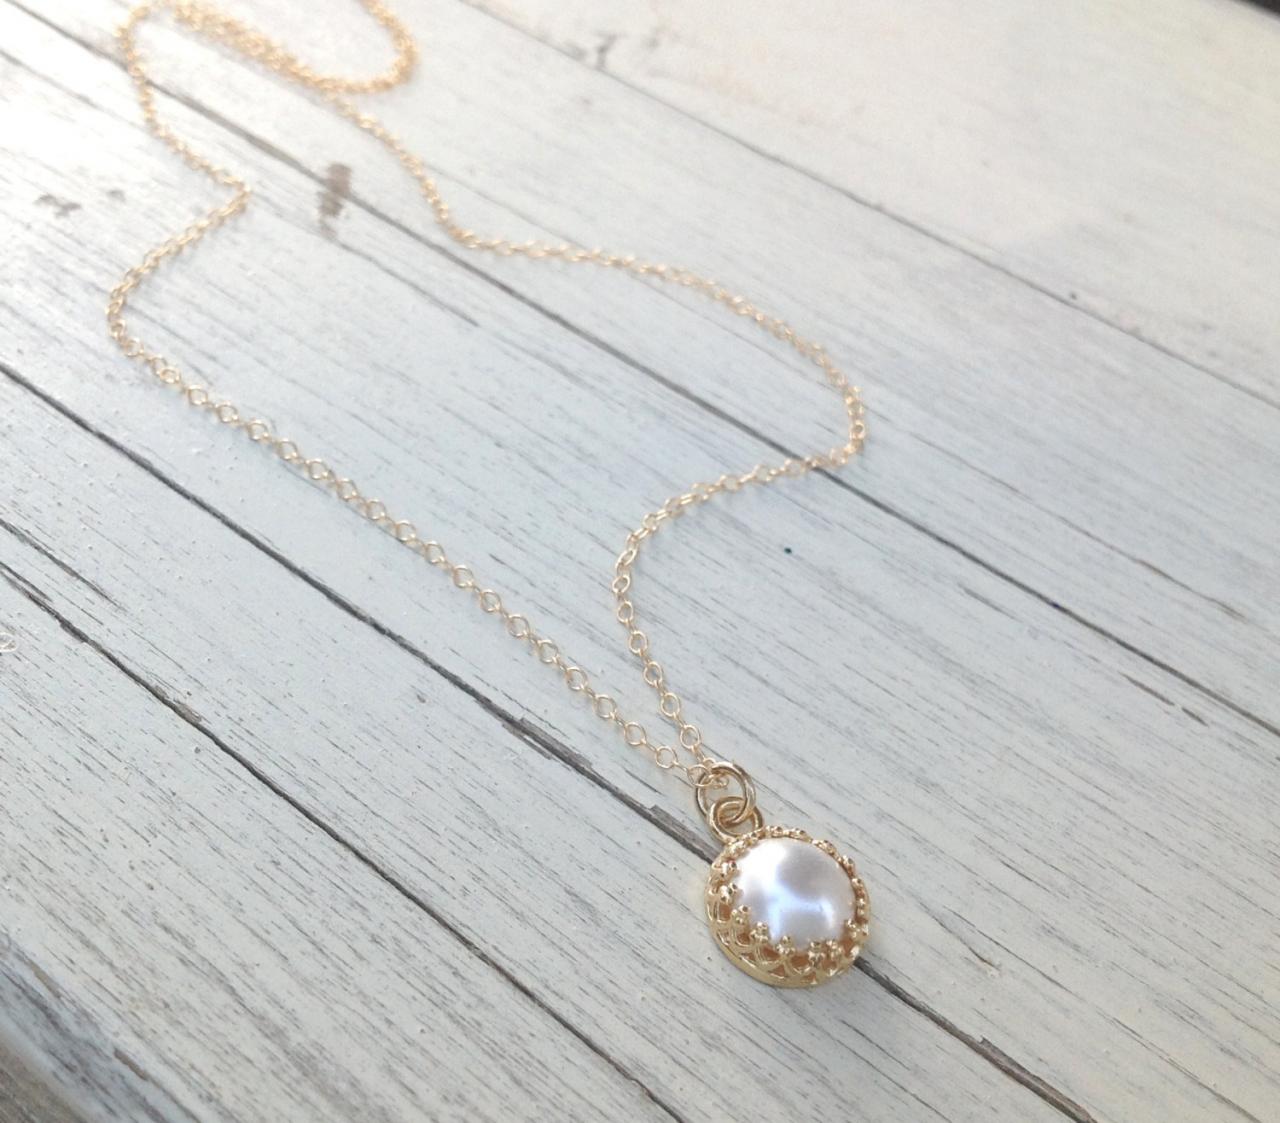 Cyber Monday - Gold Necklace, Gold Pearl Necklace, Wedding Jewelry, Simple Gold Necklace, White Pearl Necklace,1 Fresh Pearl Pendant 024